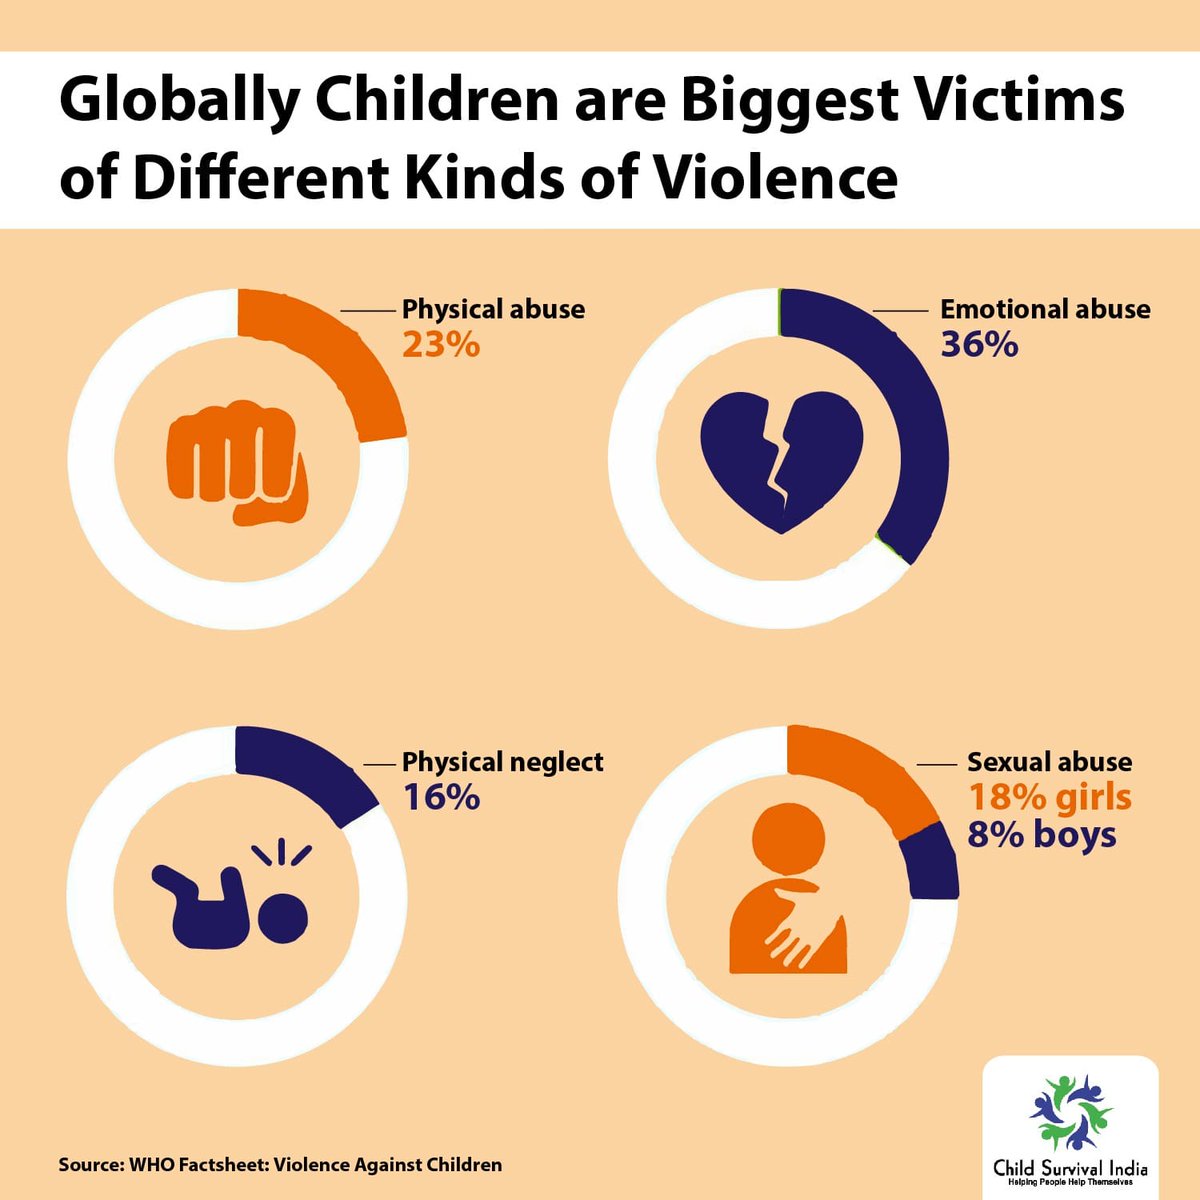 Children across the word are major victims of Violence that includes several different forms of violence against people under 18 years old, whether perpetrated by parents or other caregivers, peers, romantic partners, or strangers.
violenceagainstchildren